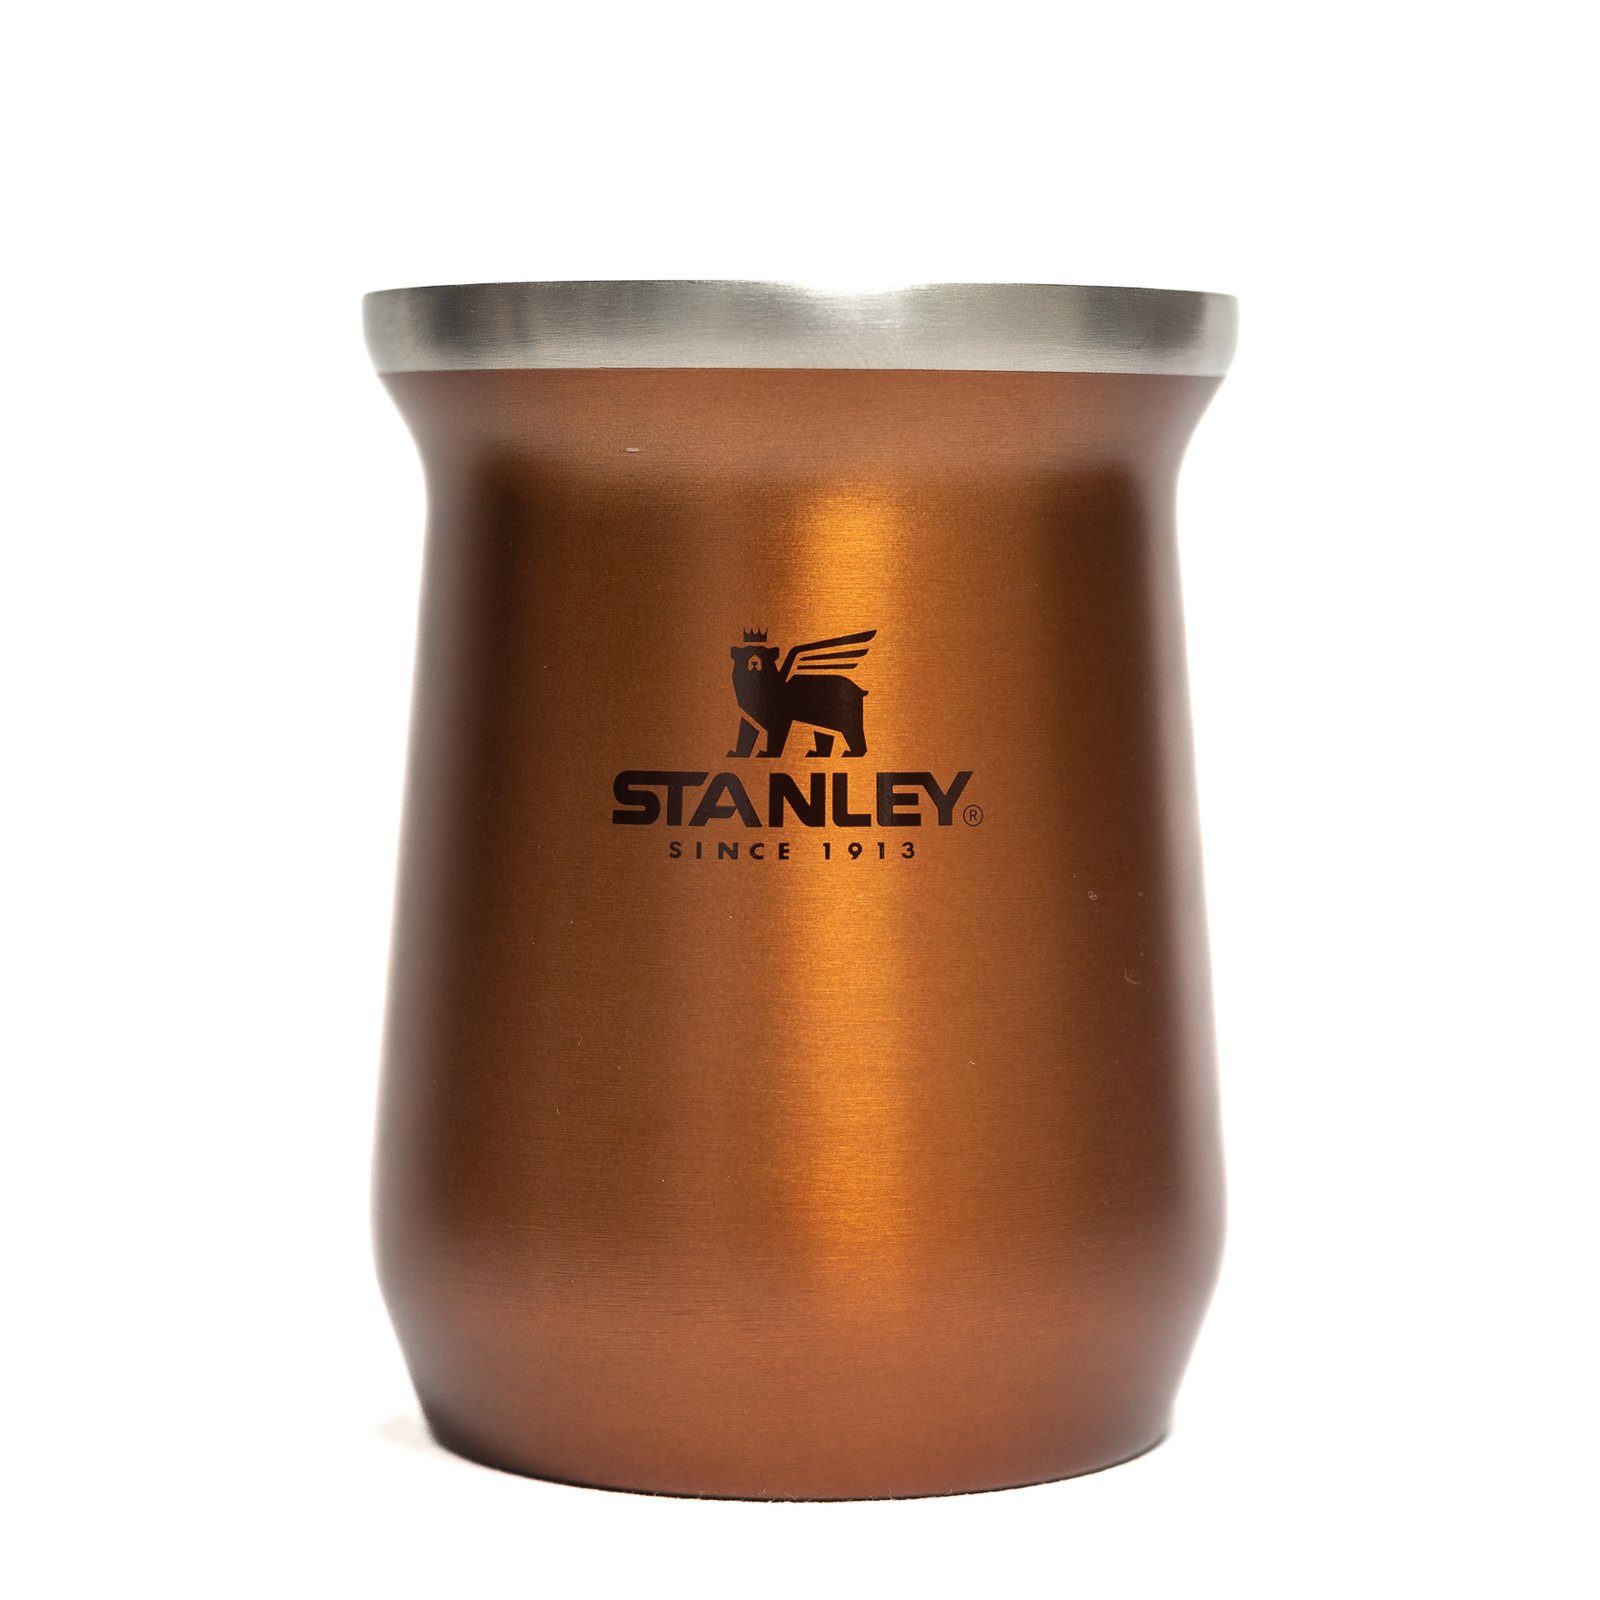 Termo Stanley Mate System 800 ml Maple